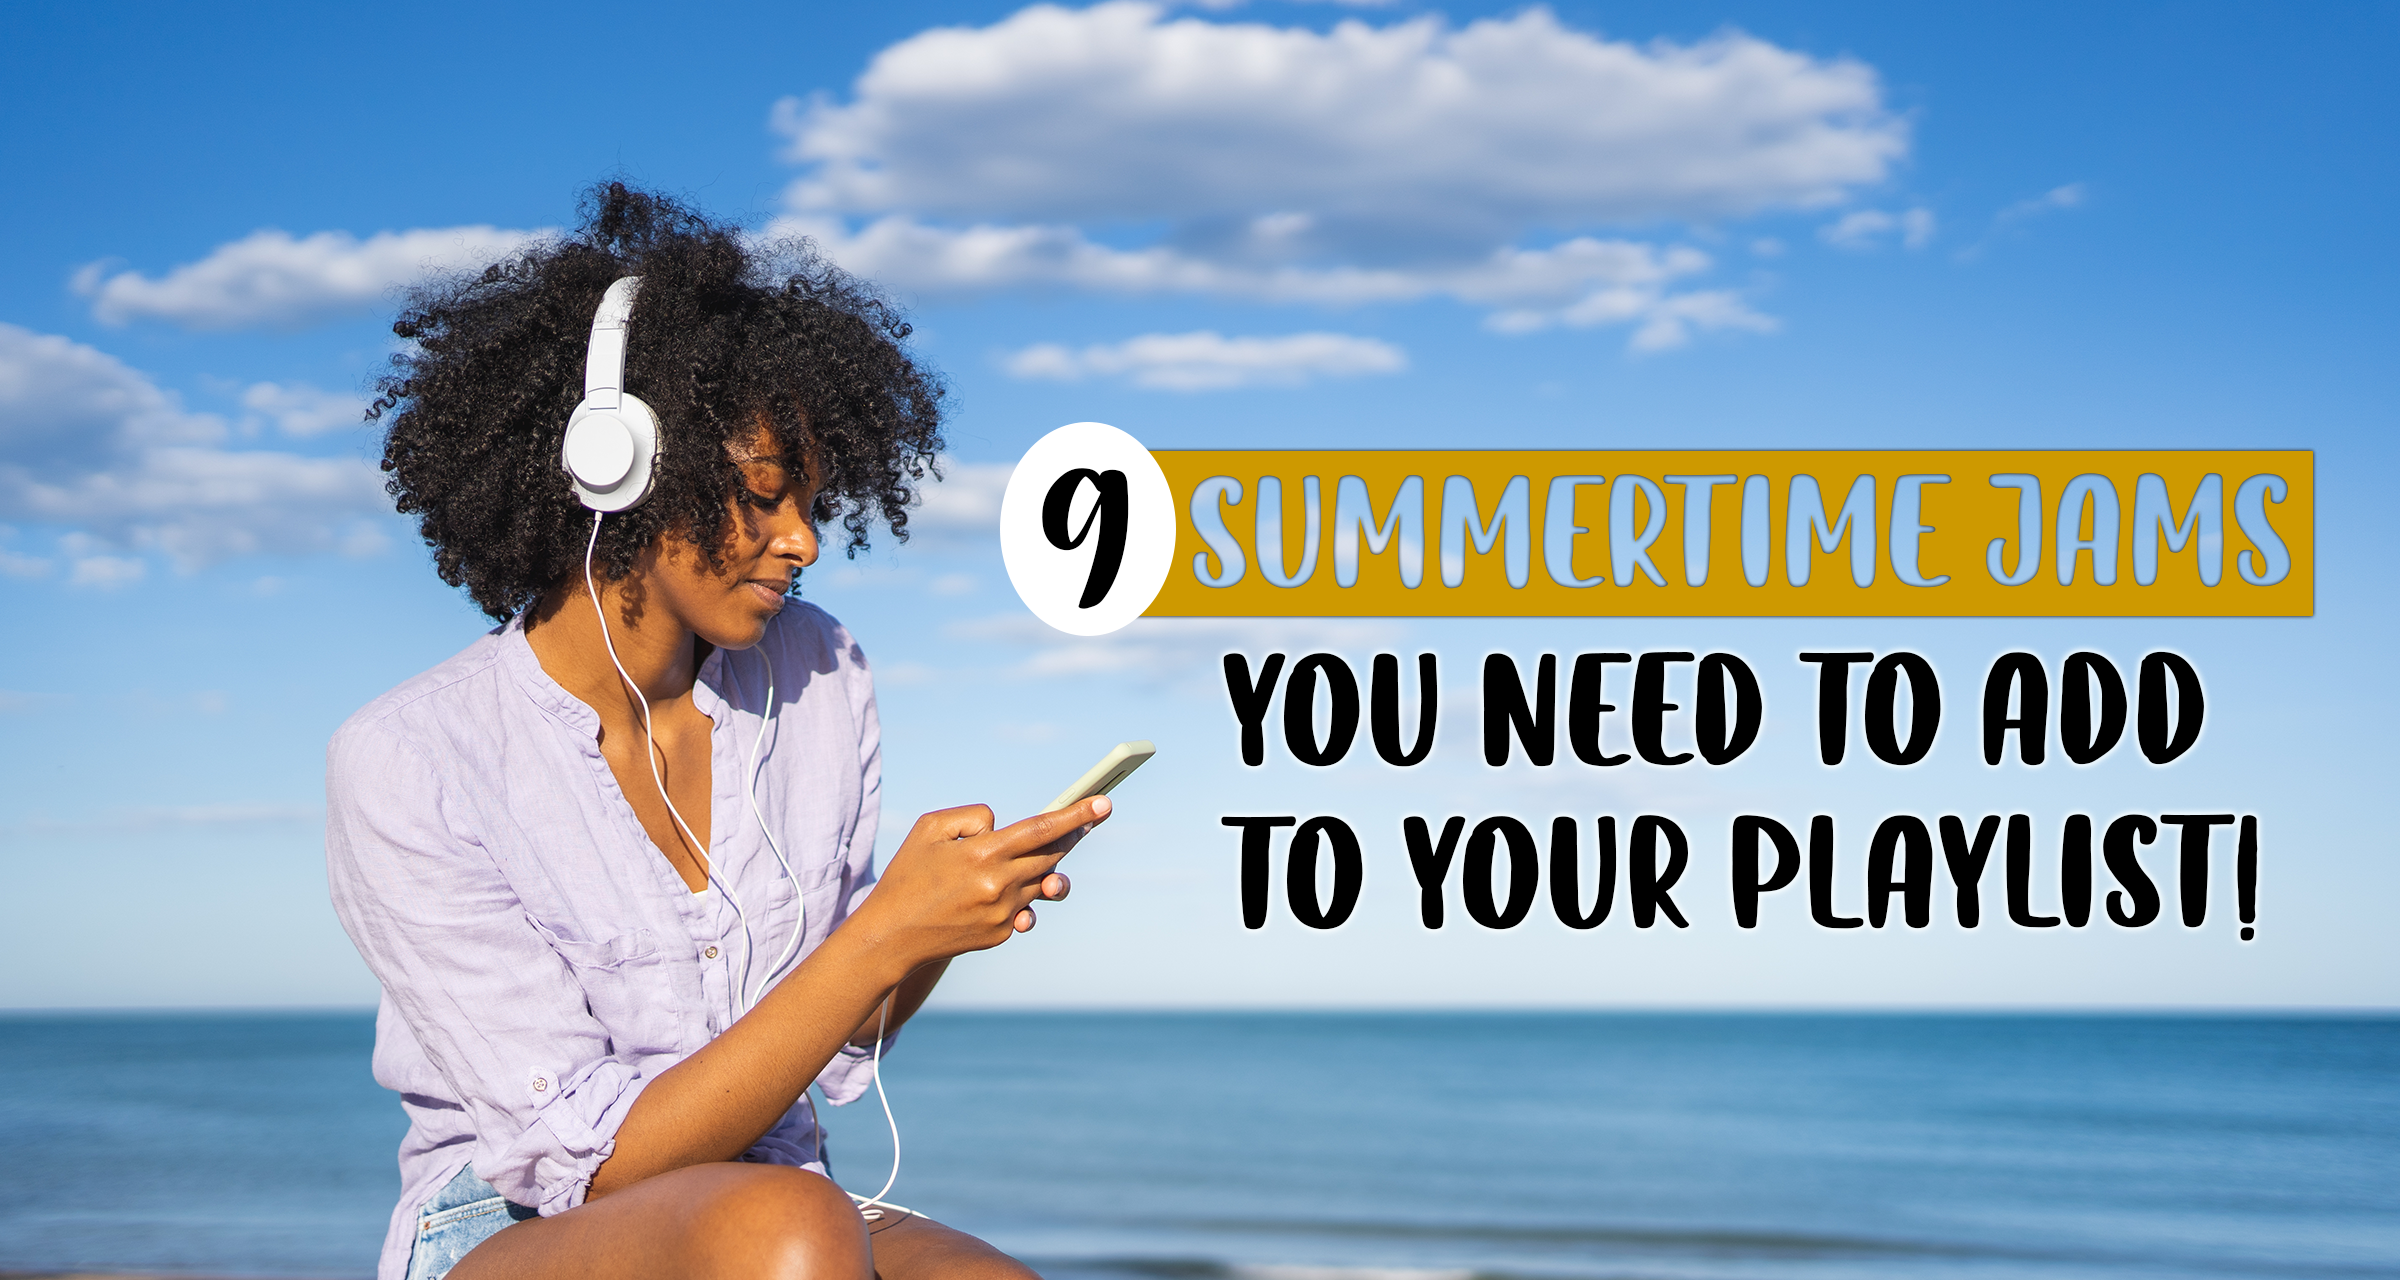 9 Summertime Jams You Need to Add to Your Playlist!